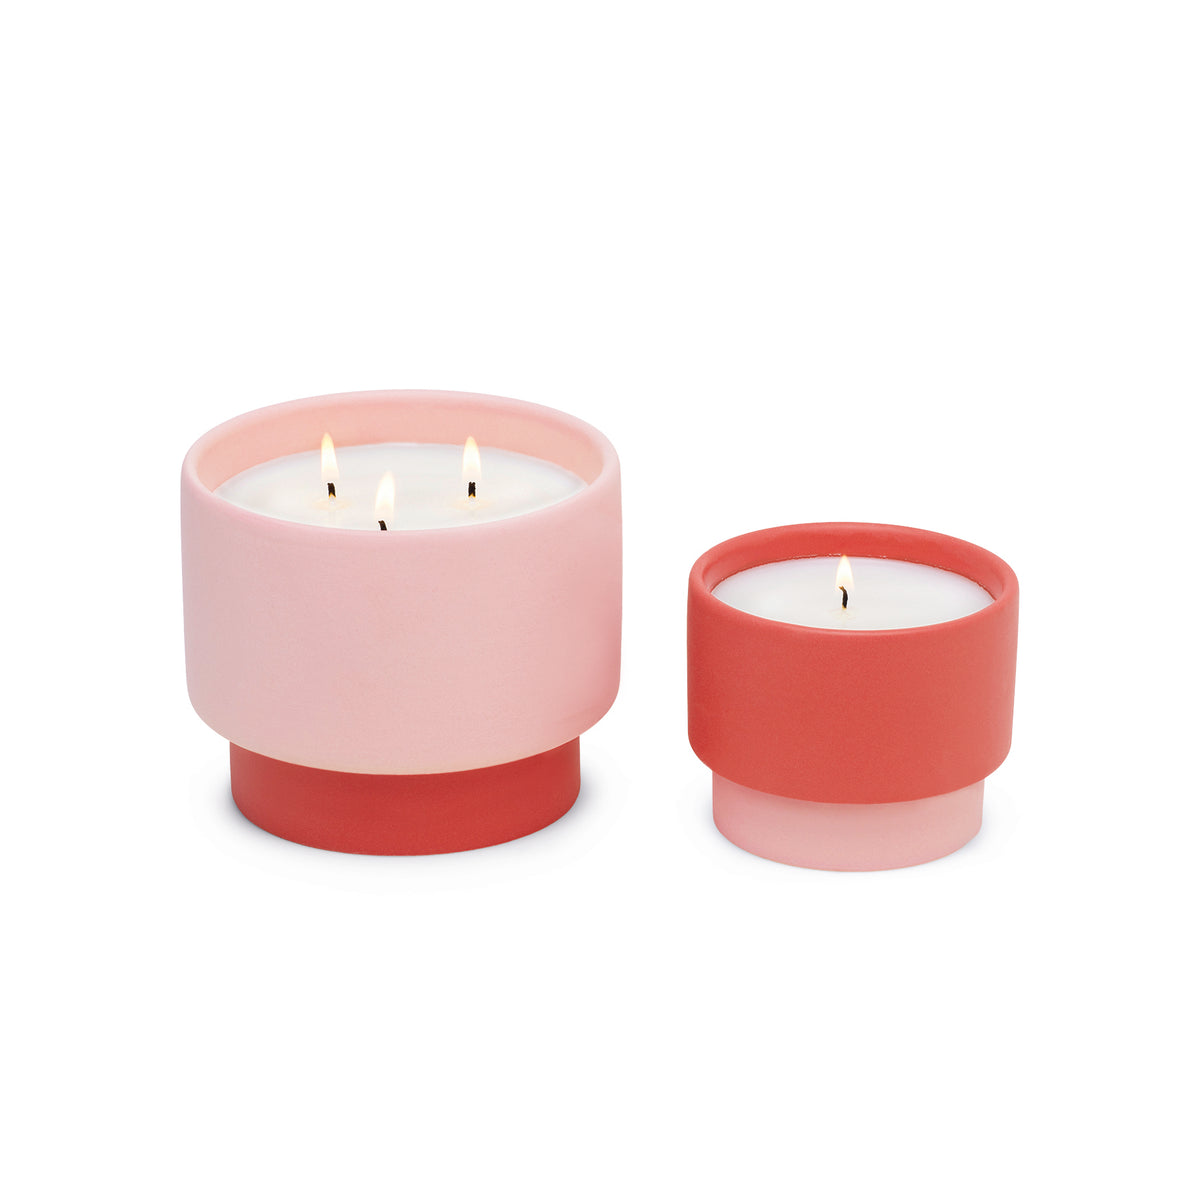 Paddy Wax Color Block Ceramic Vessel Candle